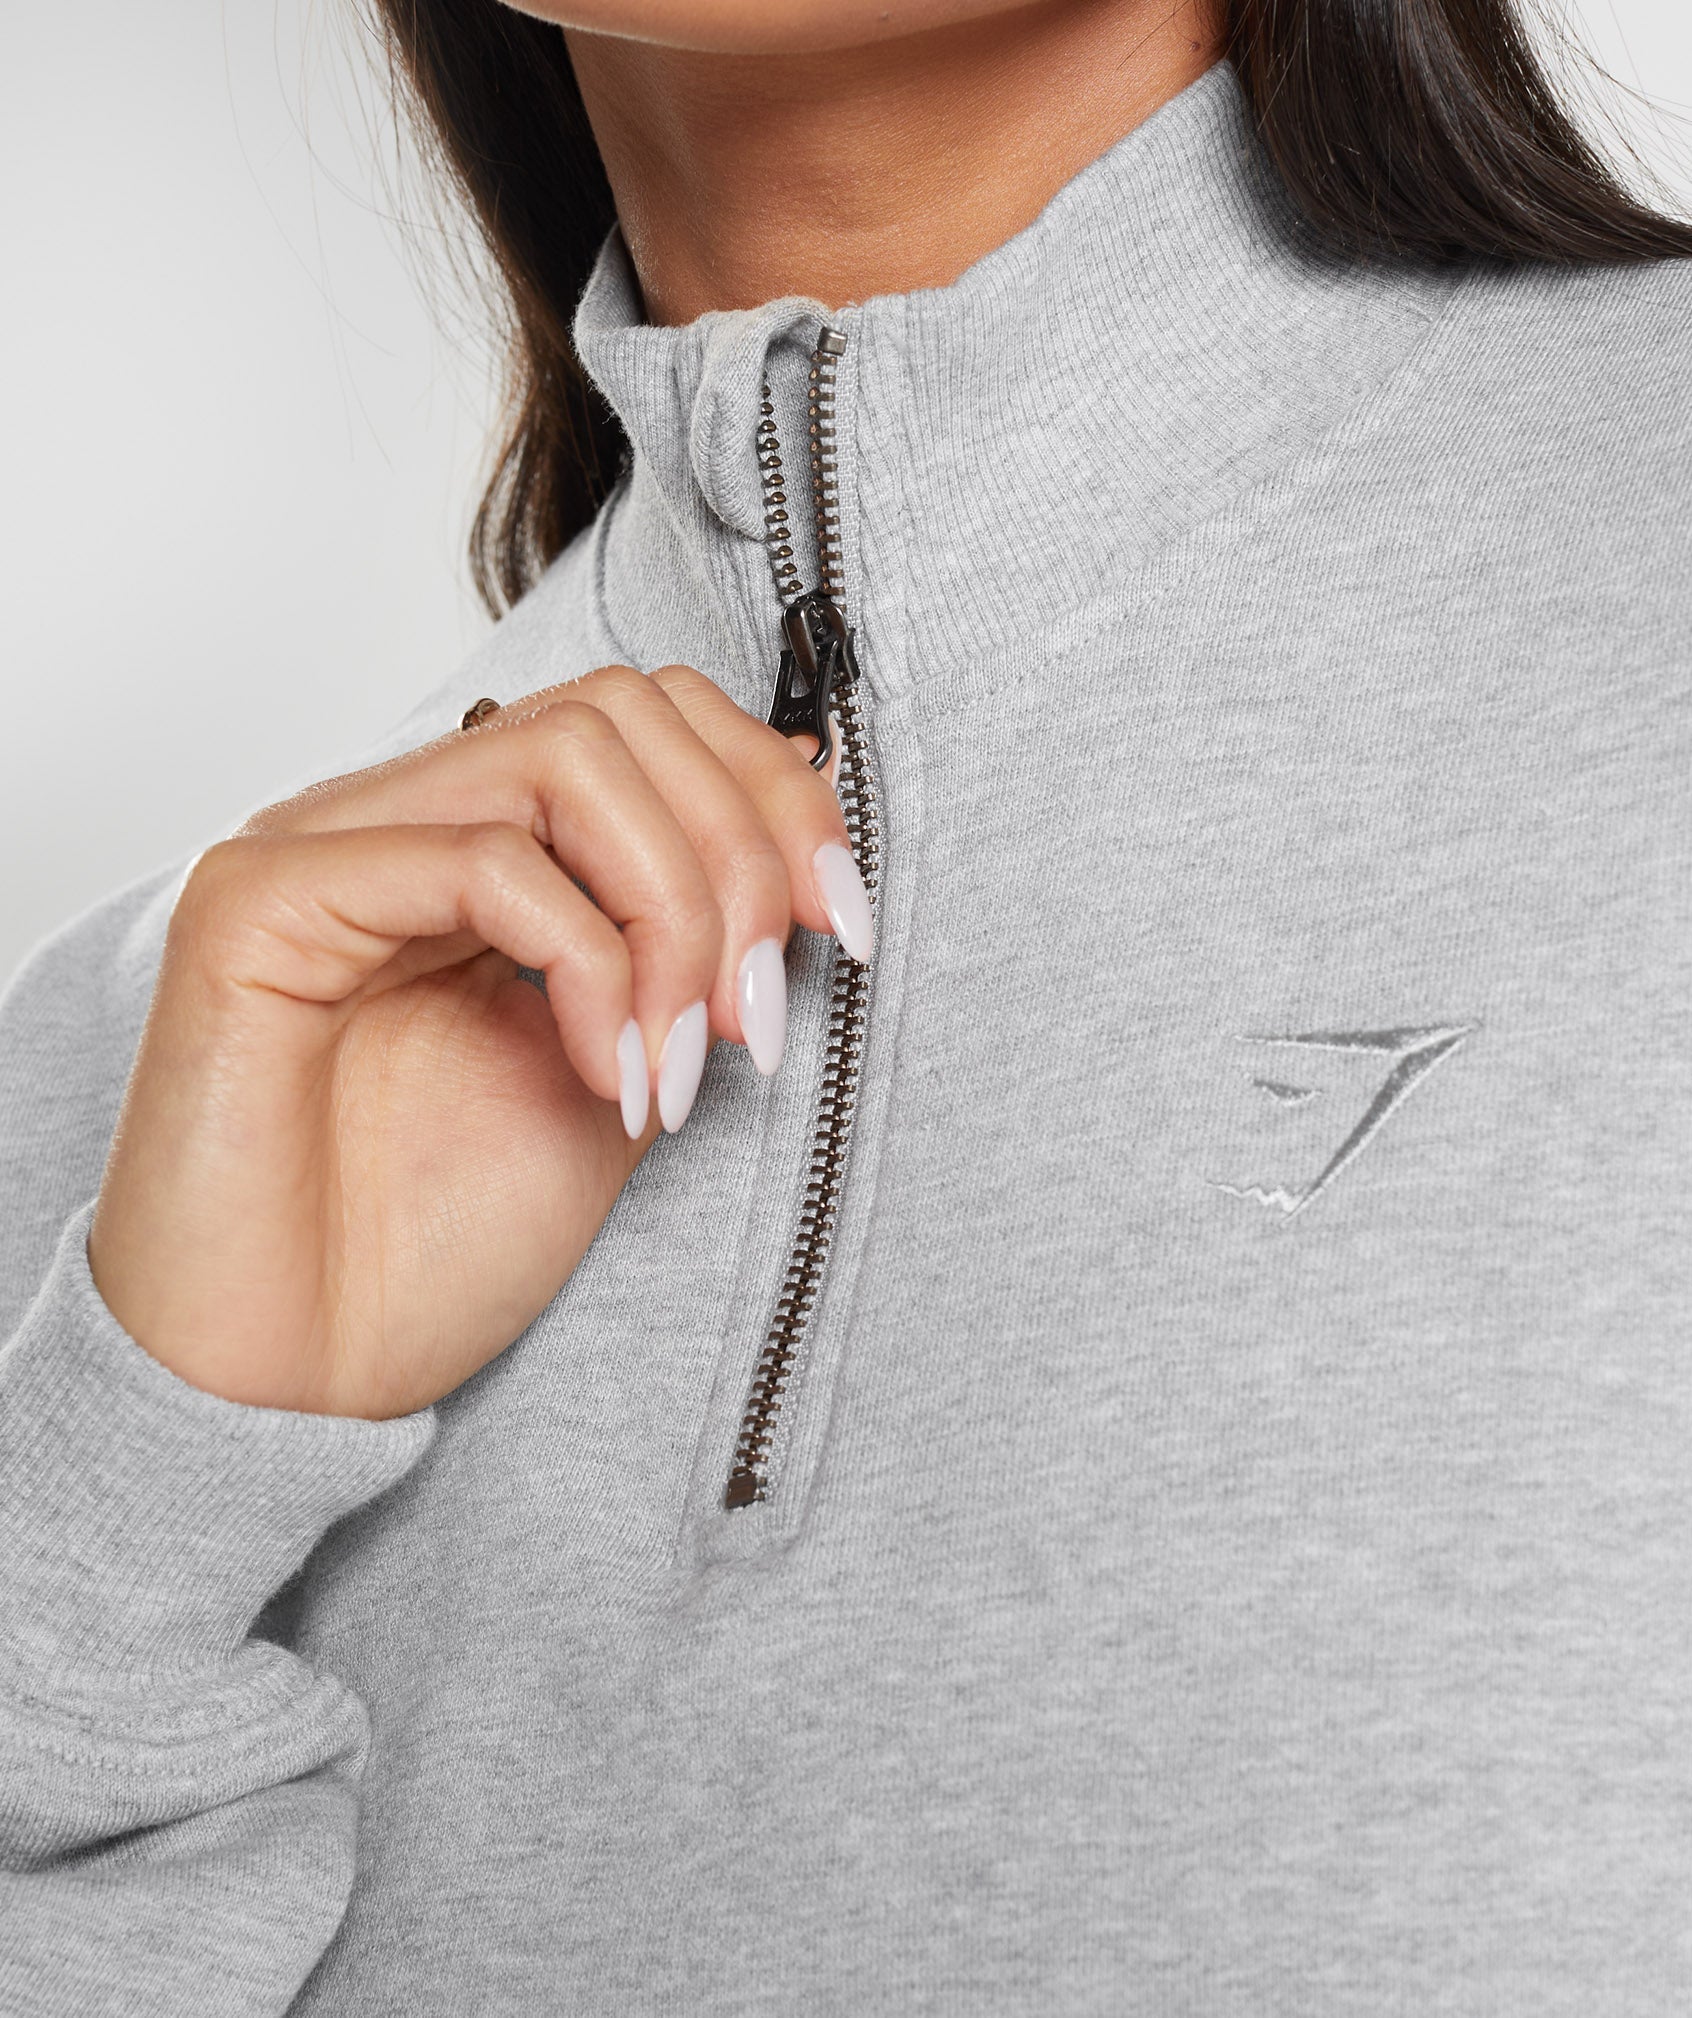 Rest Day Sweats 1/2 Zip Pullover in Light Grey Core Marl - view 3